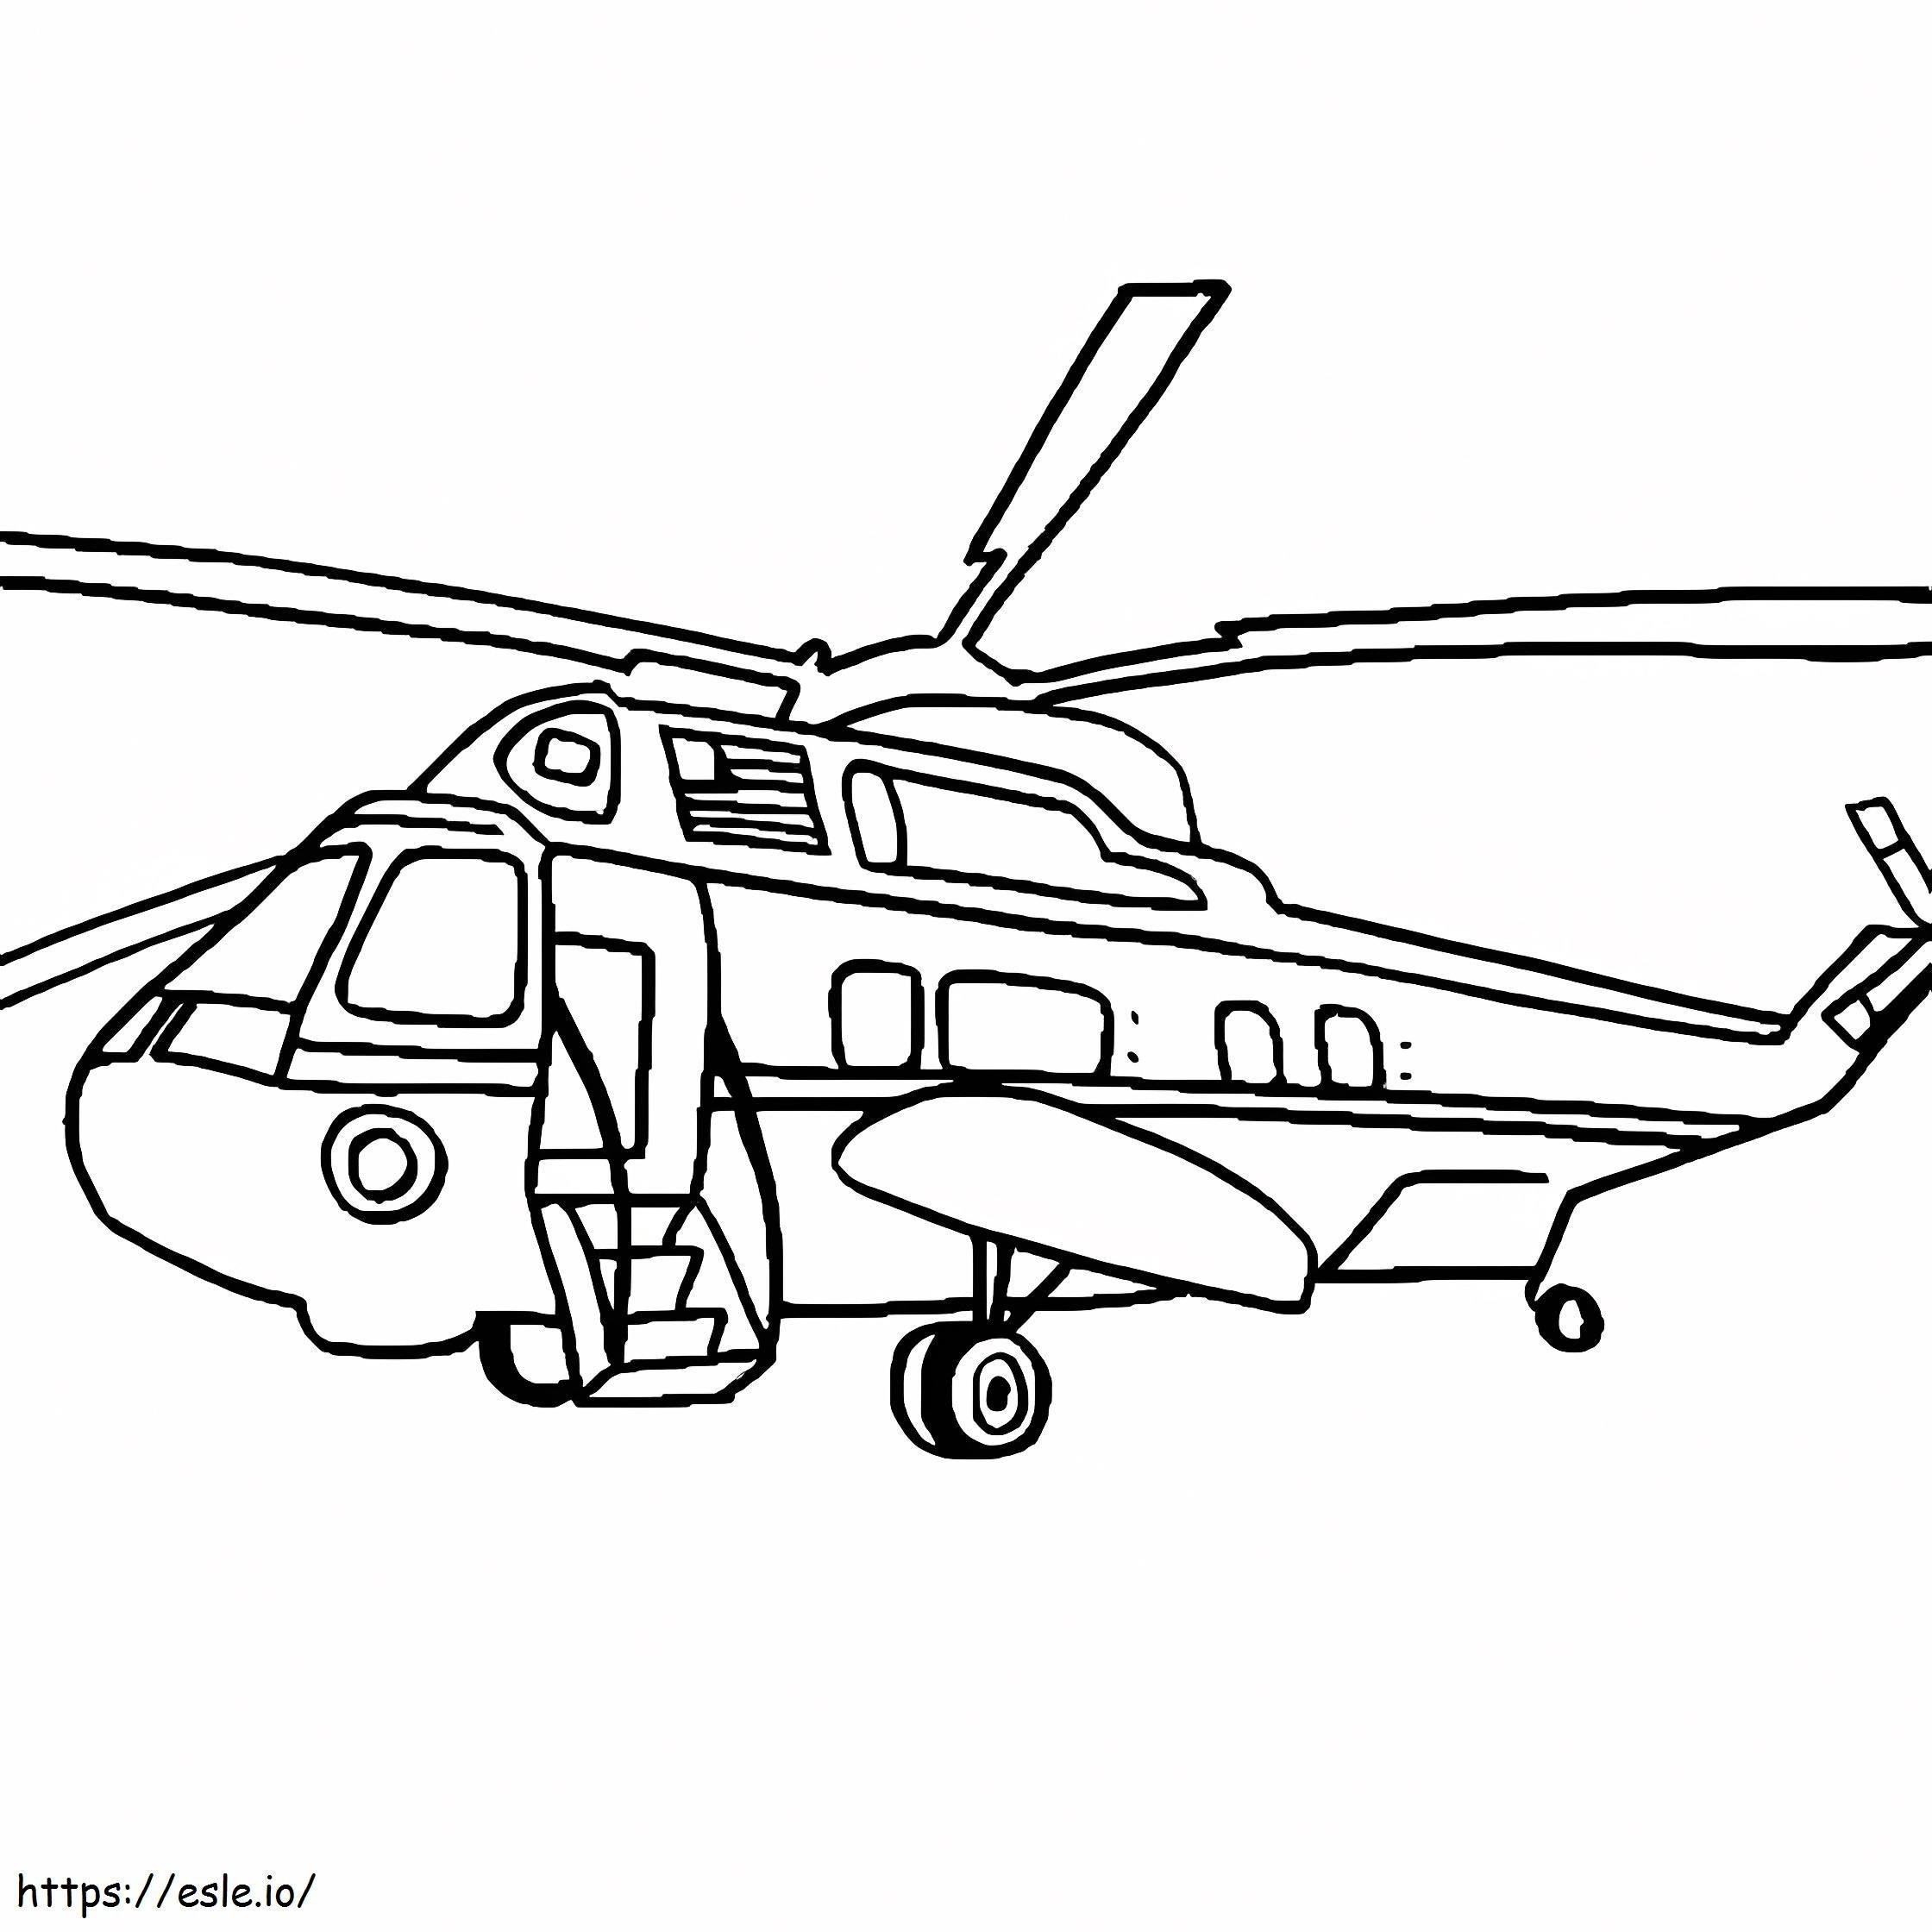 Helicoptero Blackhawk coloring page